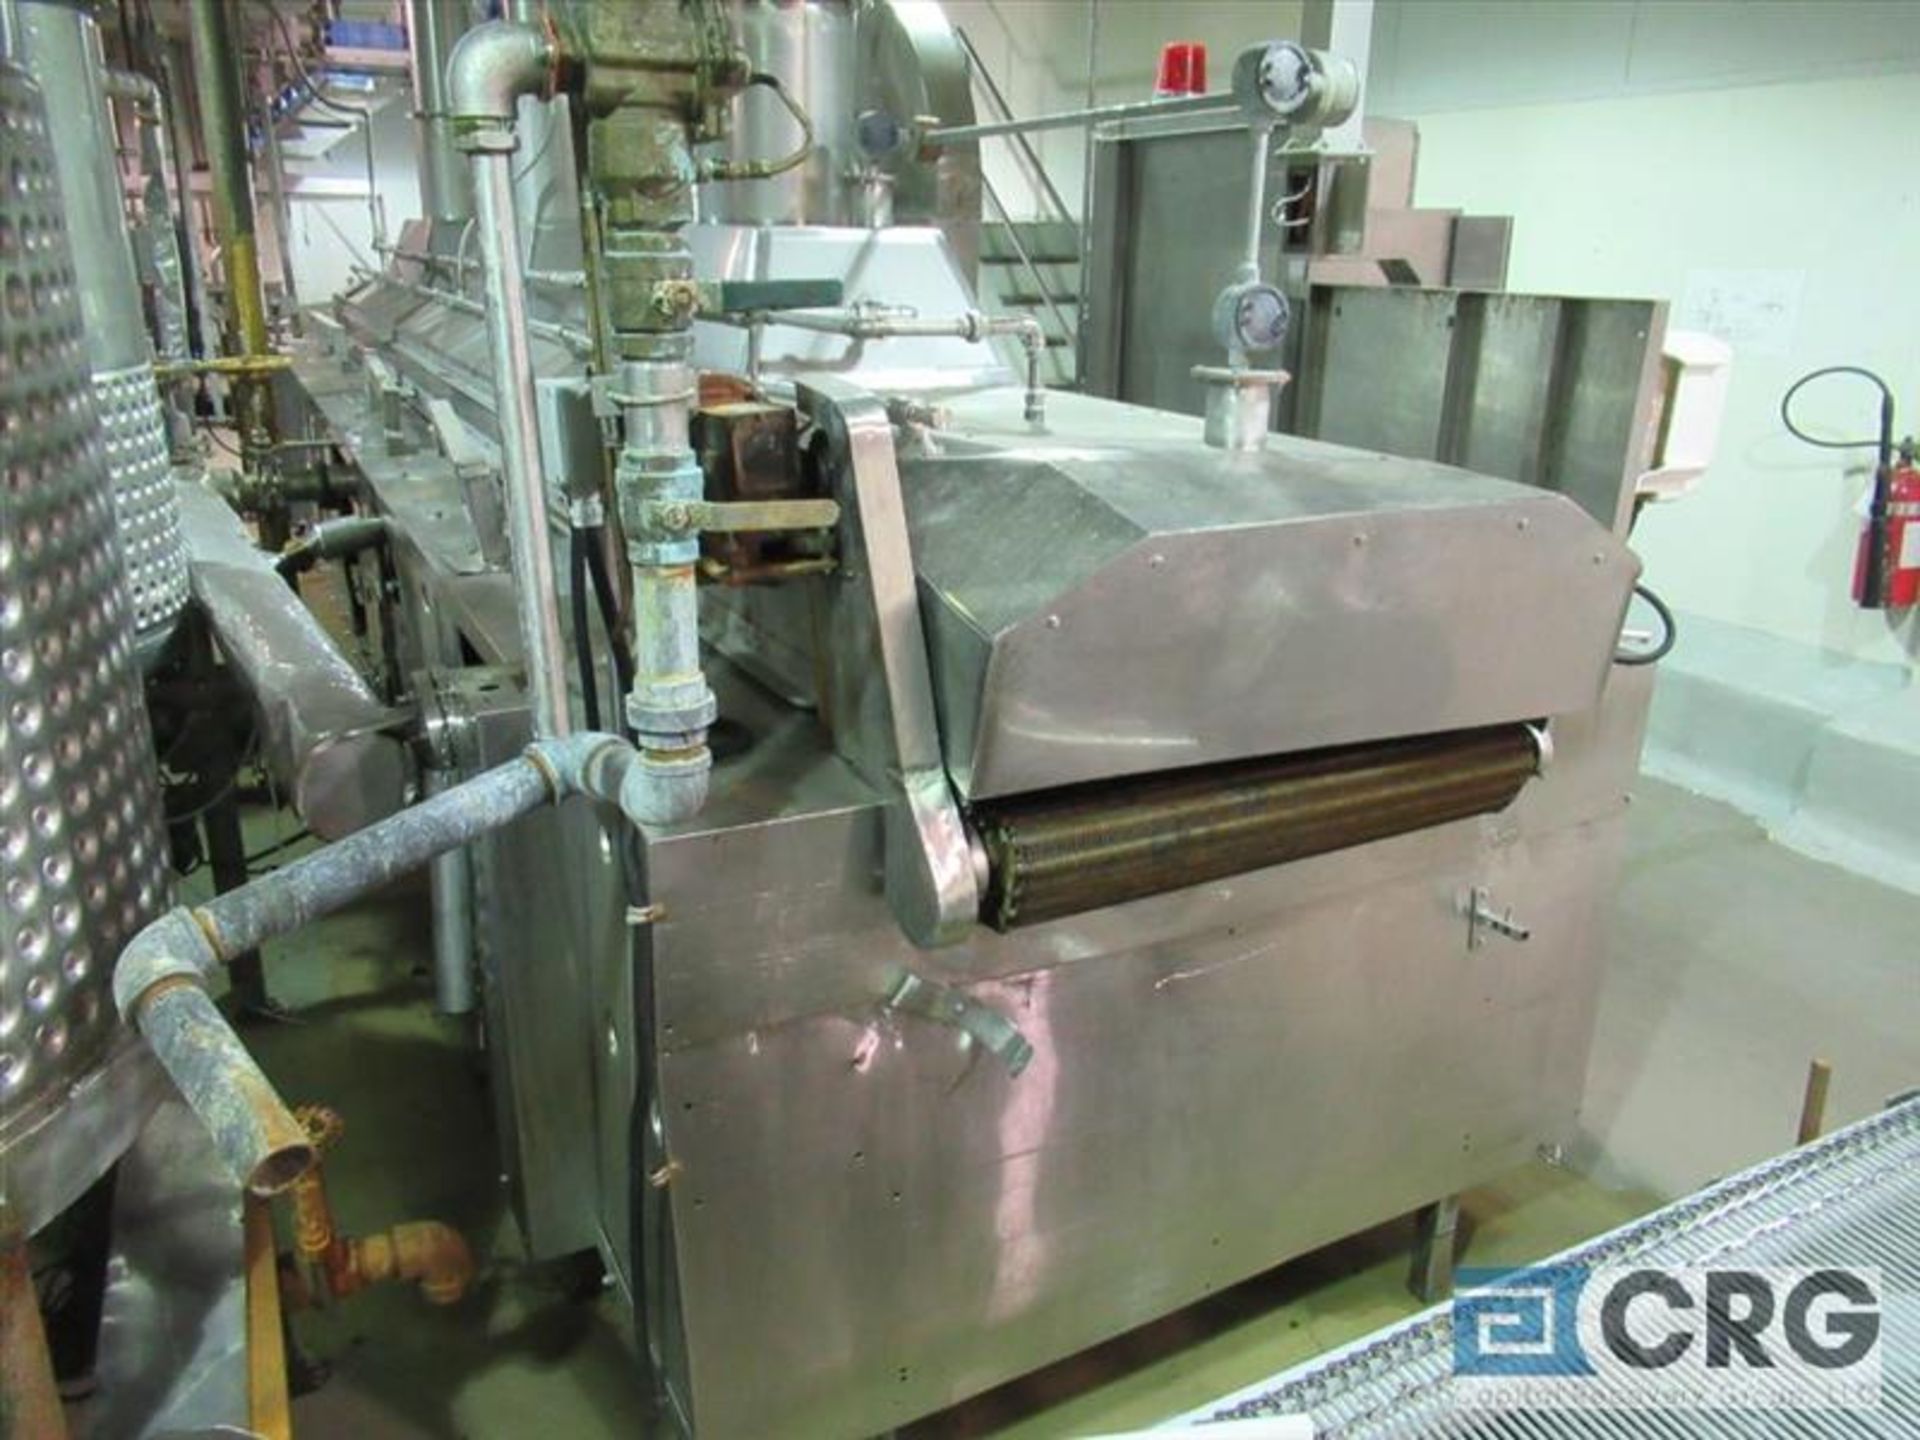 Stein FD-65S continuous hot oil fryer, converyorized thermal fluid immersion style, 5 1/2 ft. wide X - Image 3 of 7